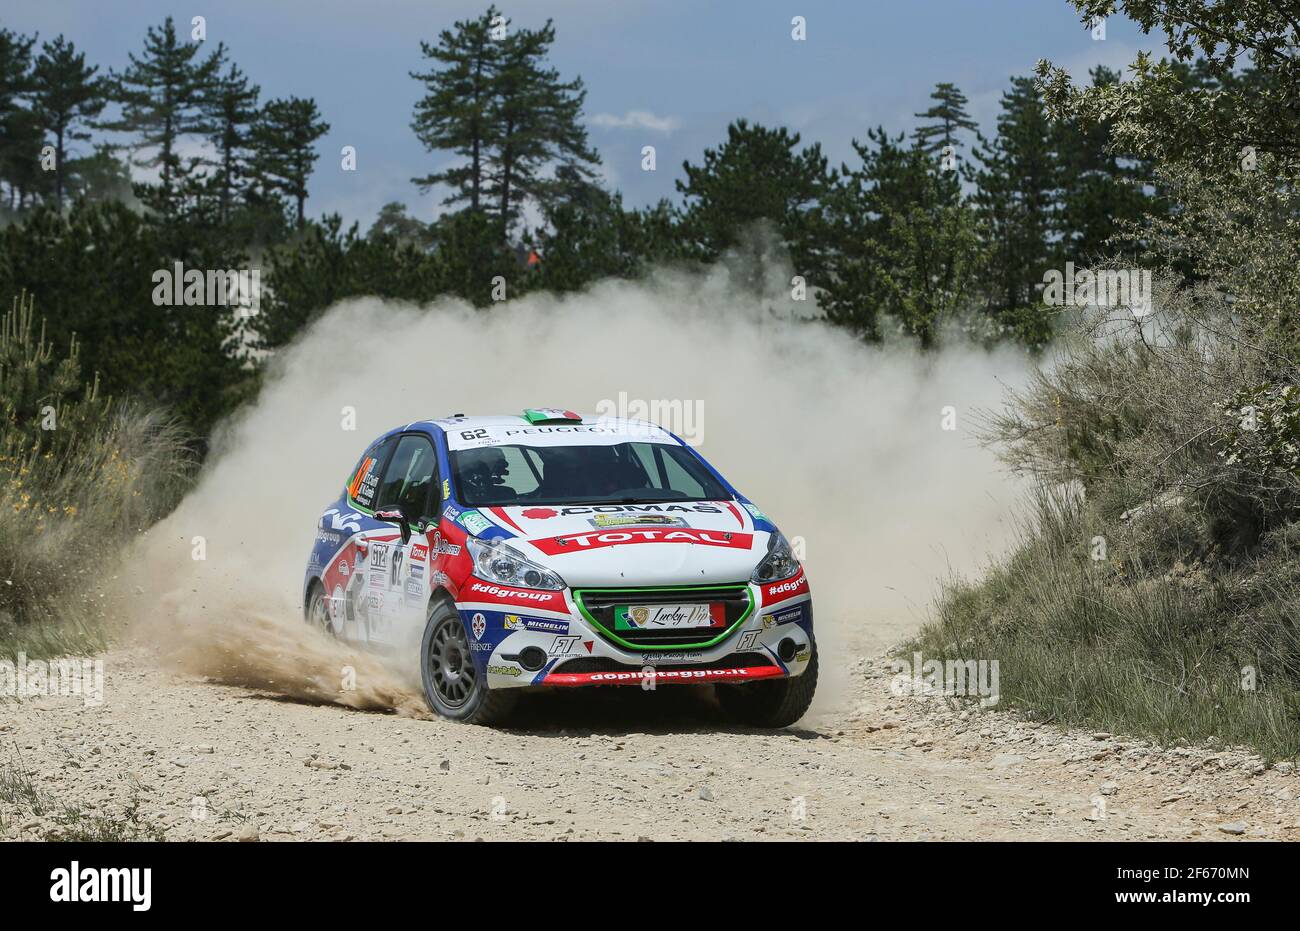 62 CIUFFI Tommaso GONELLA Nicolo Peugeot 208 VTI action during the 2017 French rally championship, rallye Terre du Diois from june 2 to 4 at Valence, France - Photo Pierrick Le Breton / DPPI Stock Photo